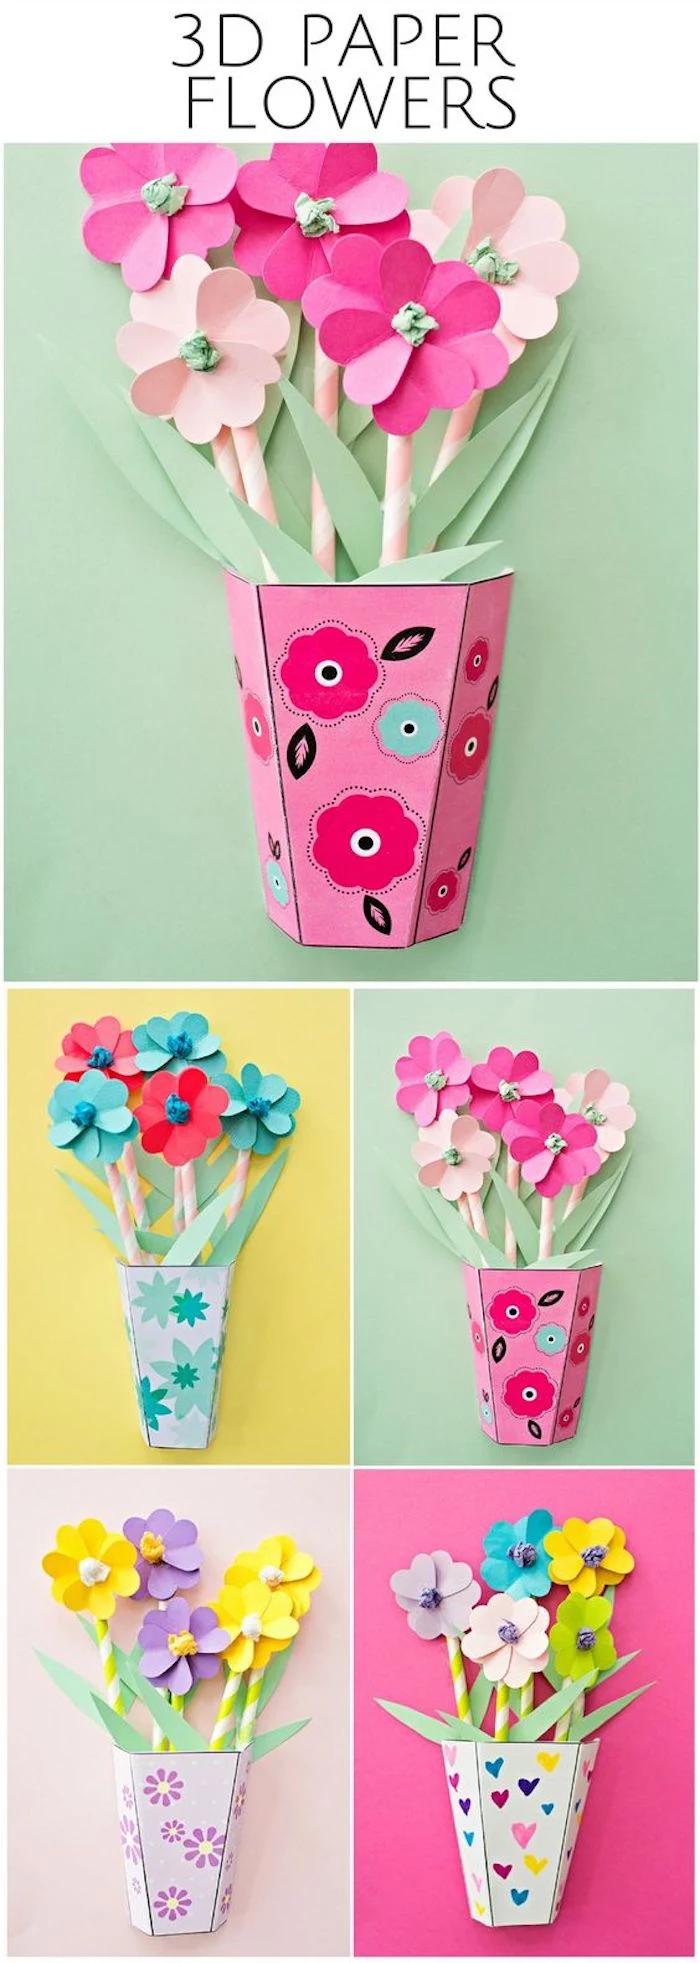 easy crafts for toddlers, 3d paper flowers, colourful paper pots, photo collage